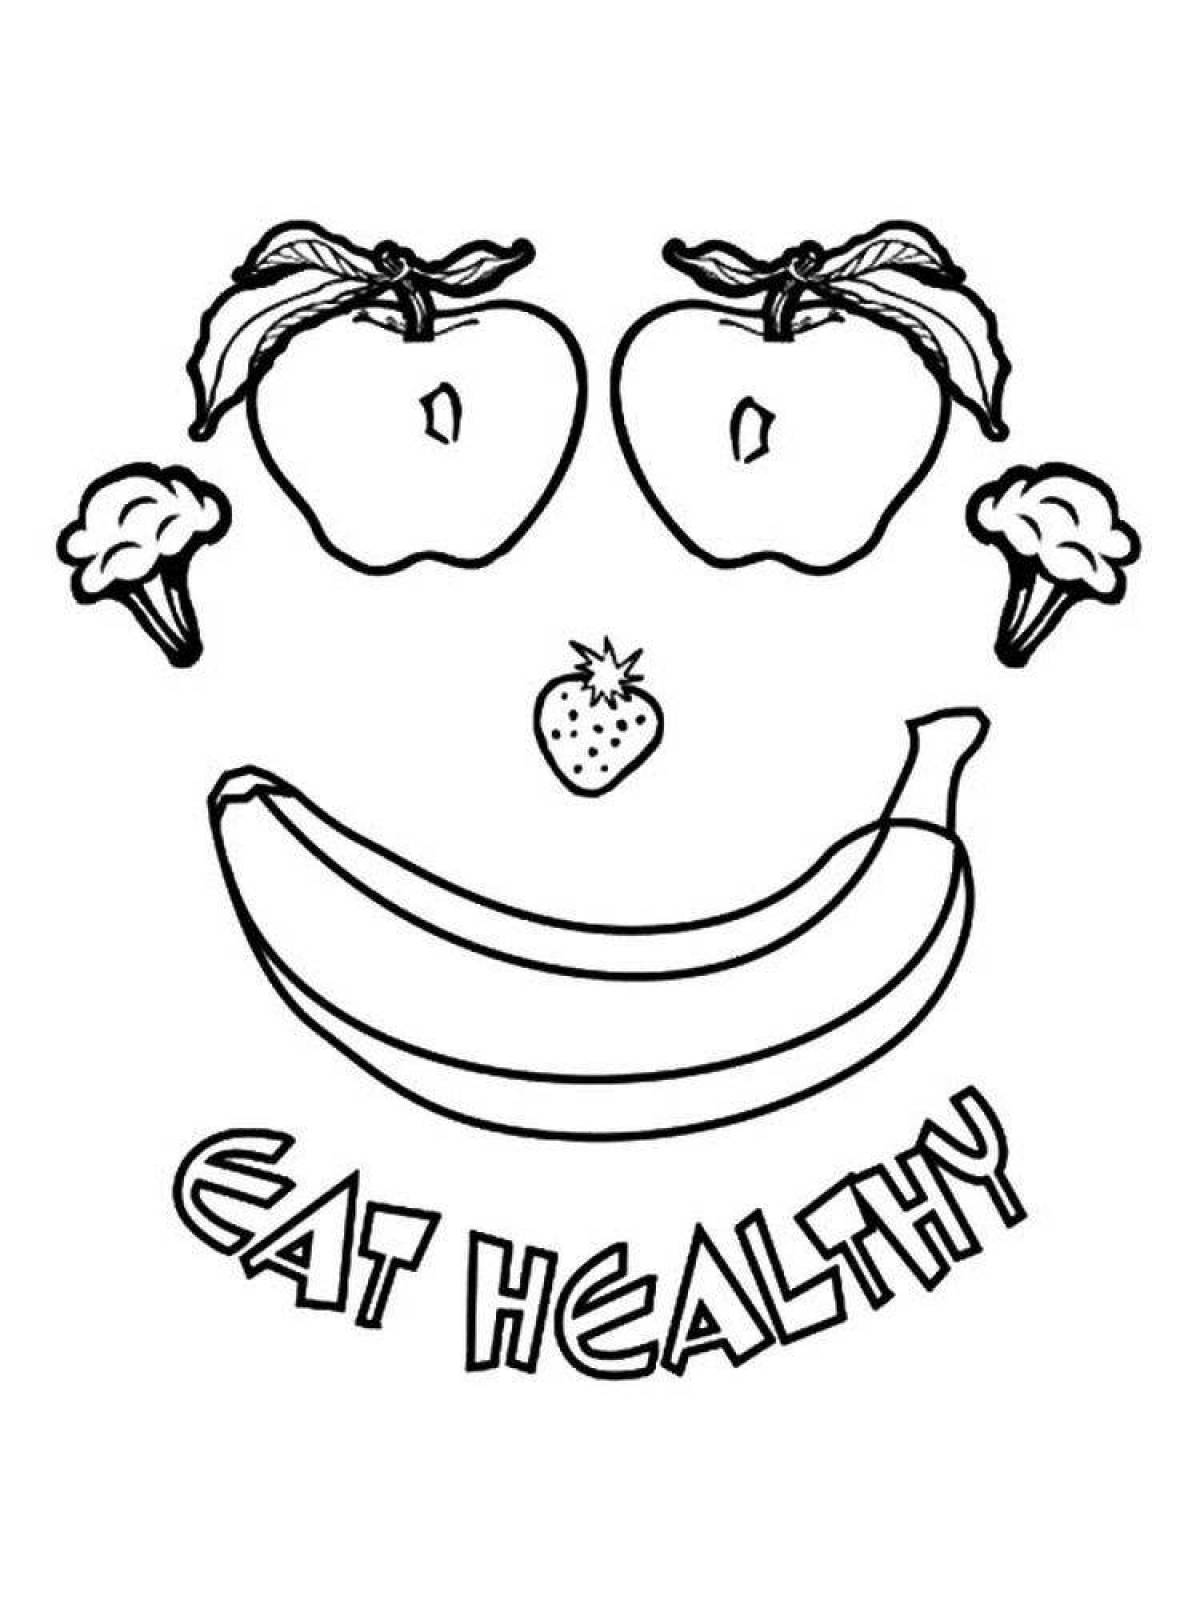 Appetizing healthy food coloring page